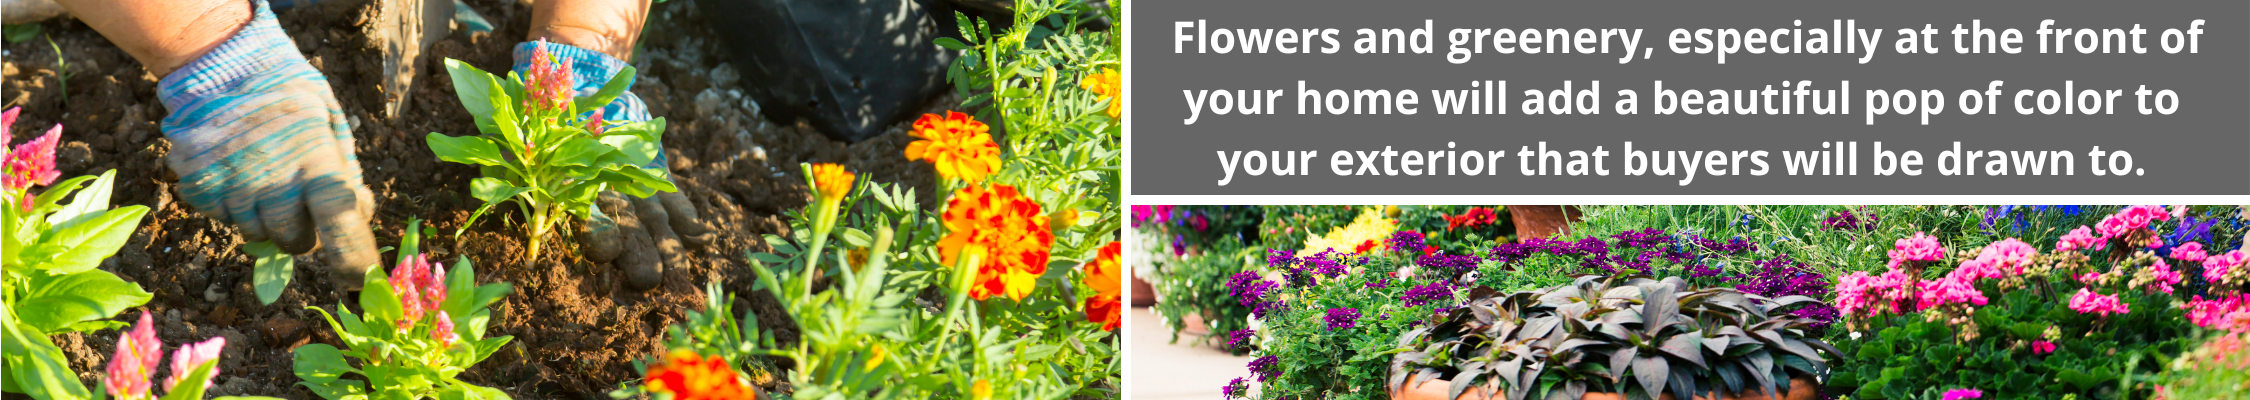 Flowers and greenery will add a pop of color to your front yard